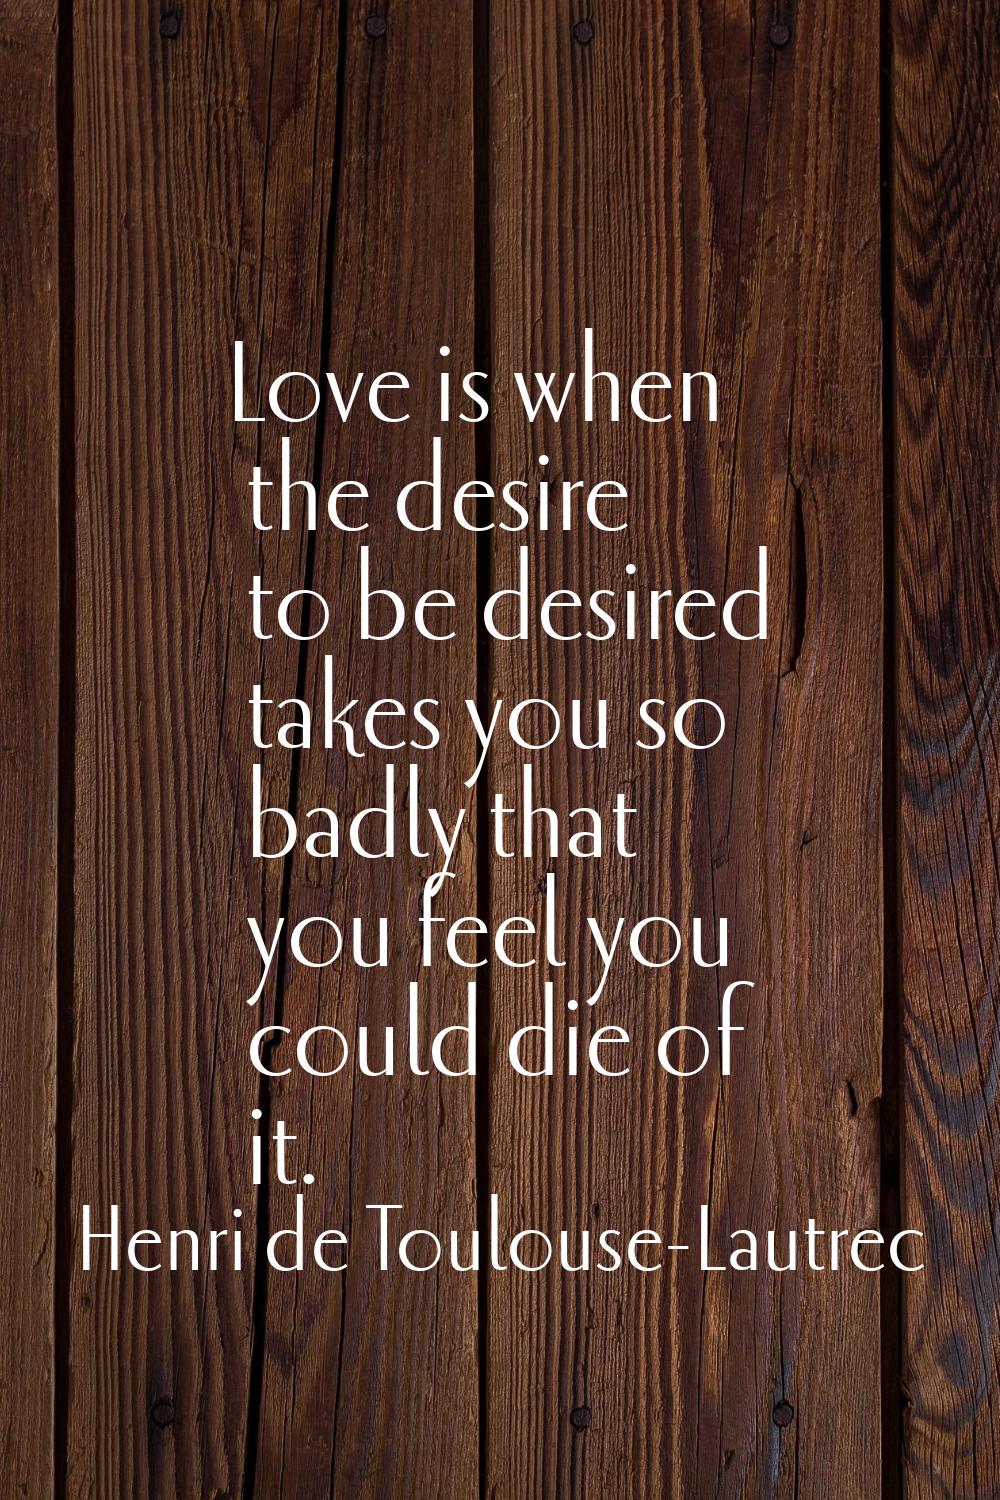 Love is when the desire to be desired takes you so badly that you feel you could die of it.